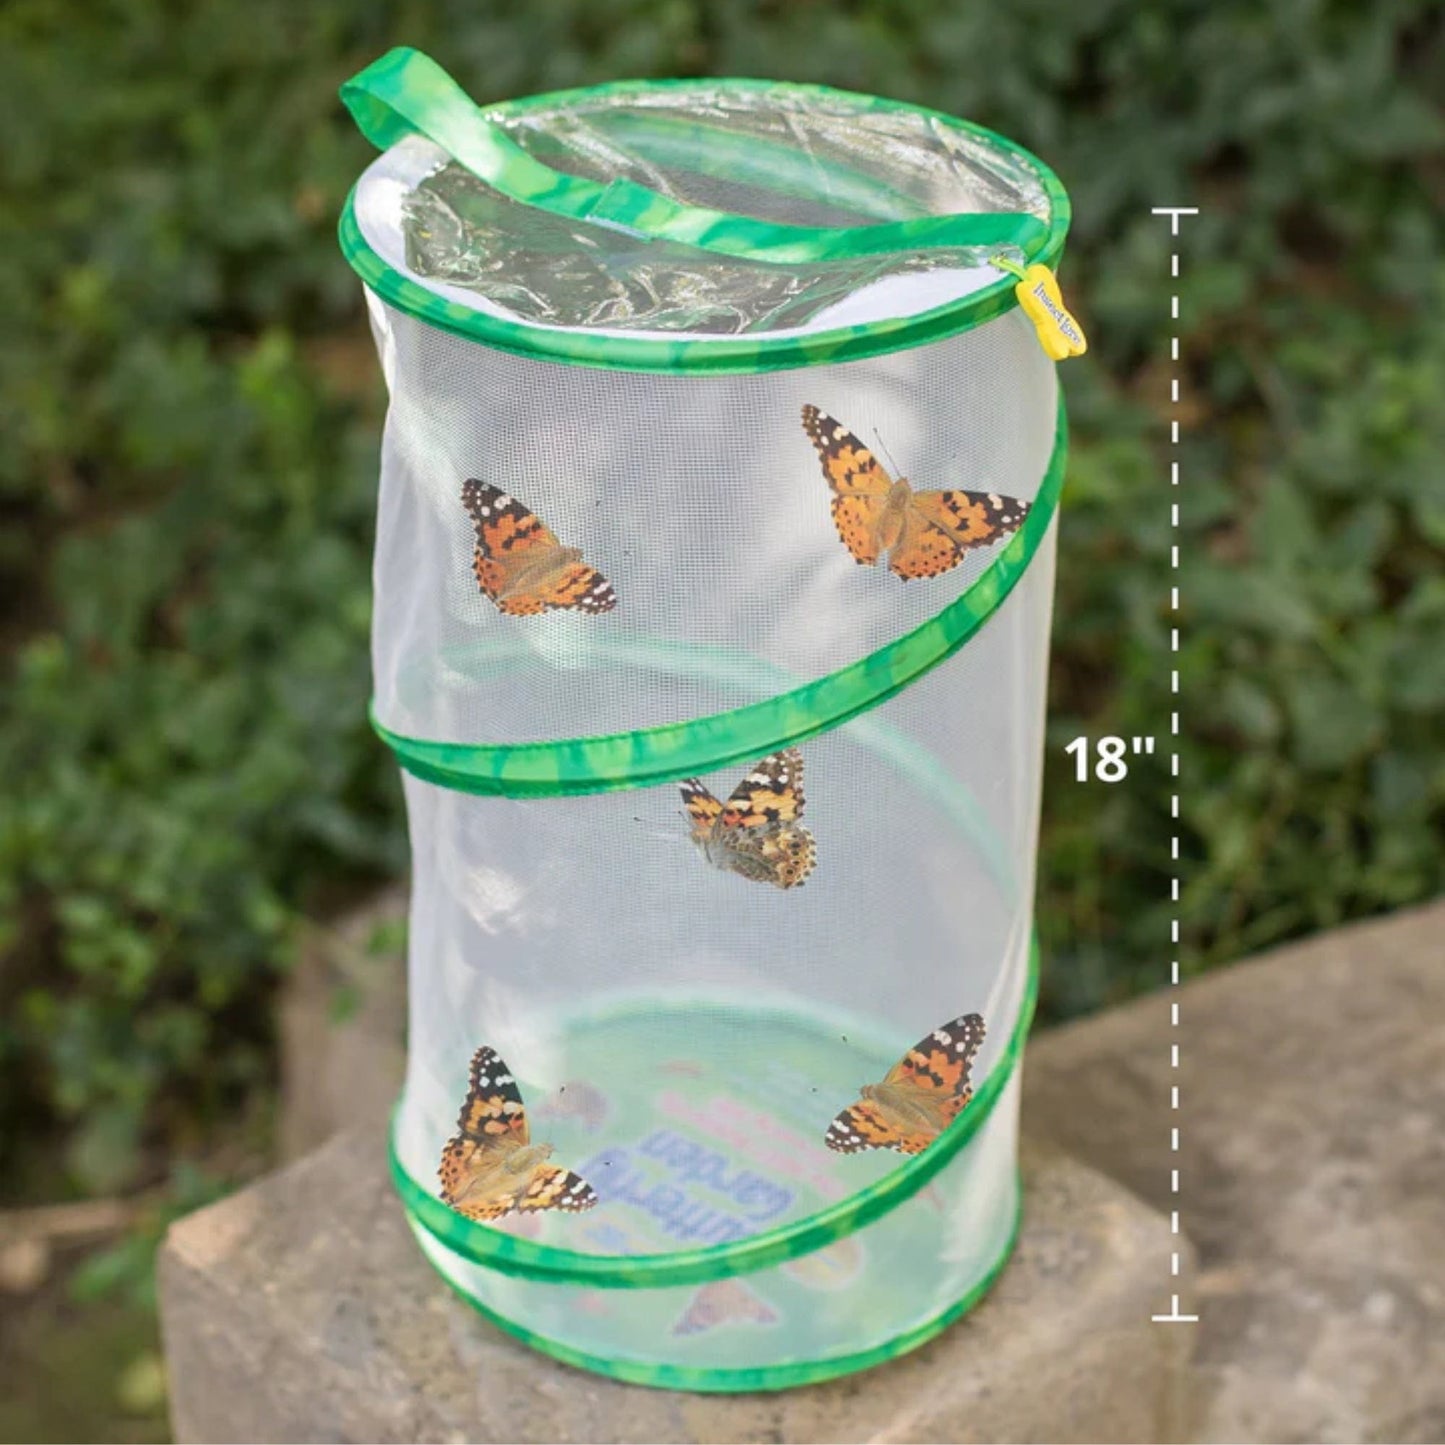 Giant Butterfly Garden® with Voucher